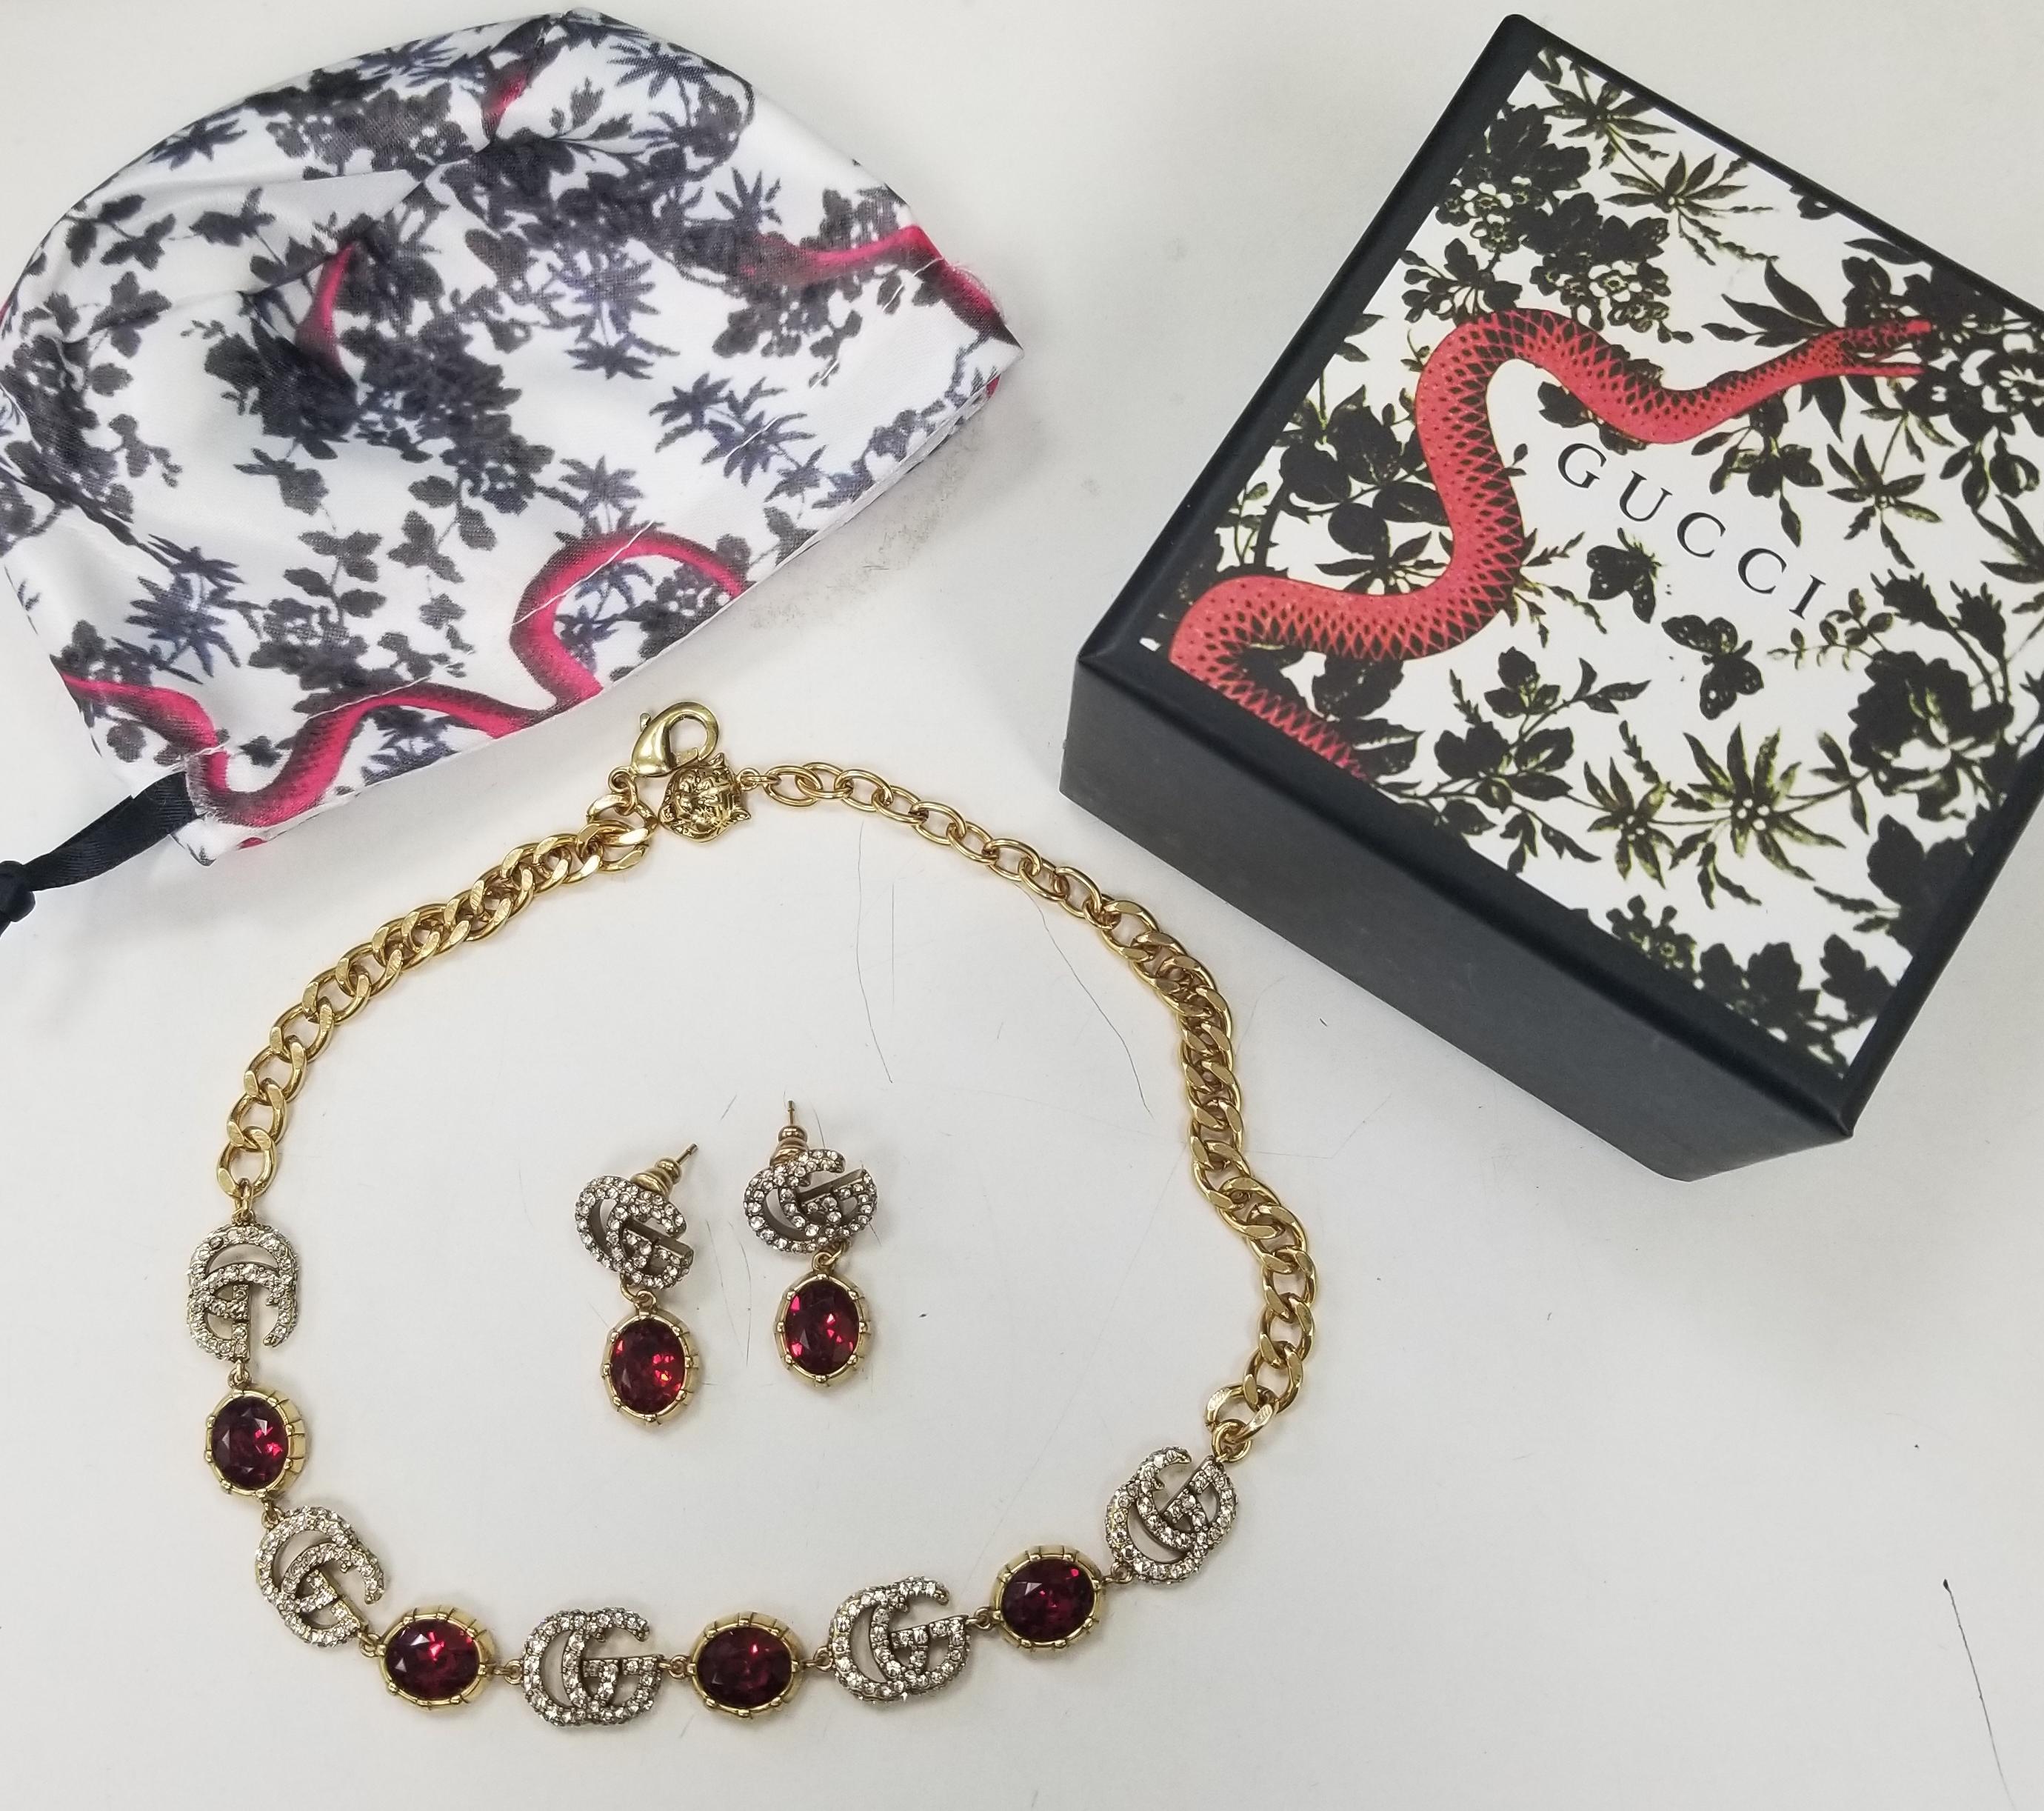 A Red faceted crystal pendant combines with the crystal Double G detail, forming a sparkling pendant that completes these earrings in aged gold-toned metal and matching necklace with adjustable length.

    Metal with aged gold finish
    Crystal